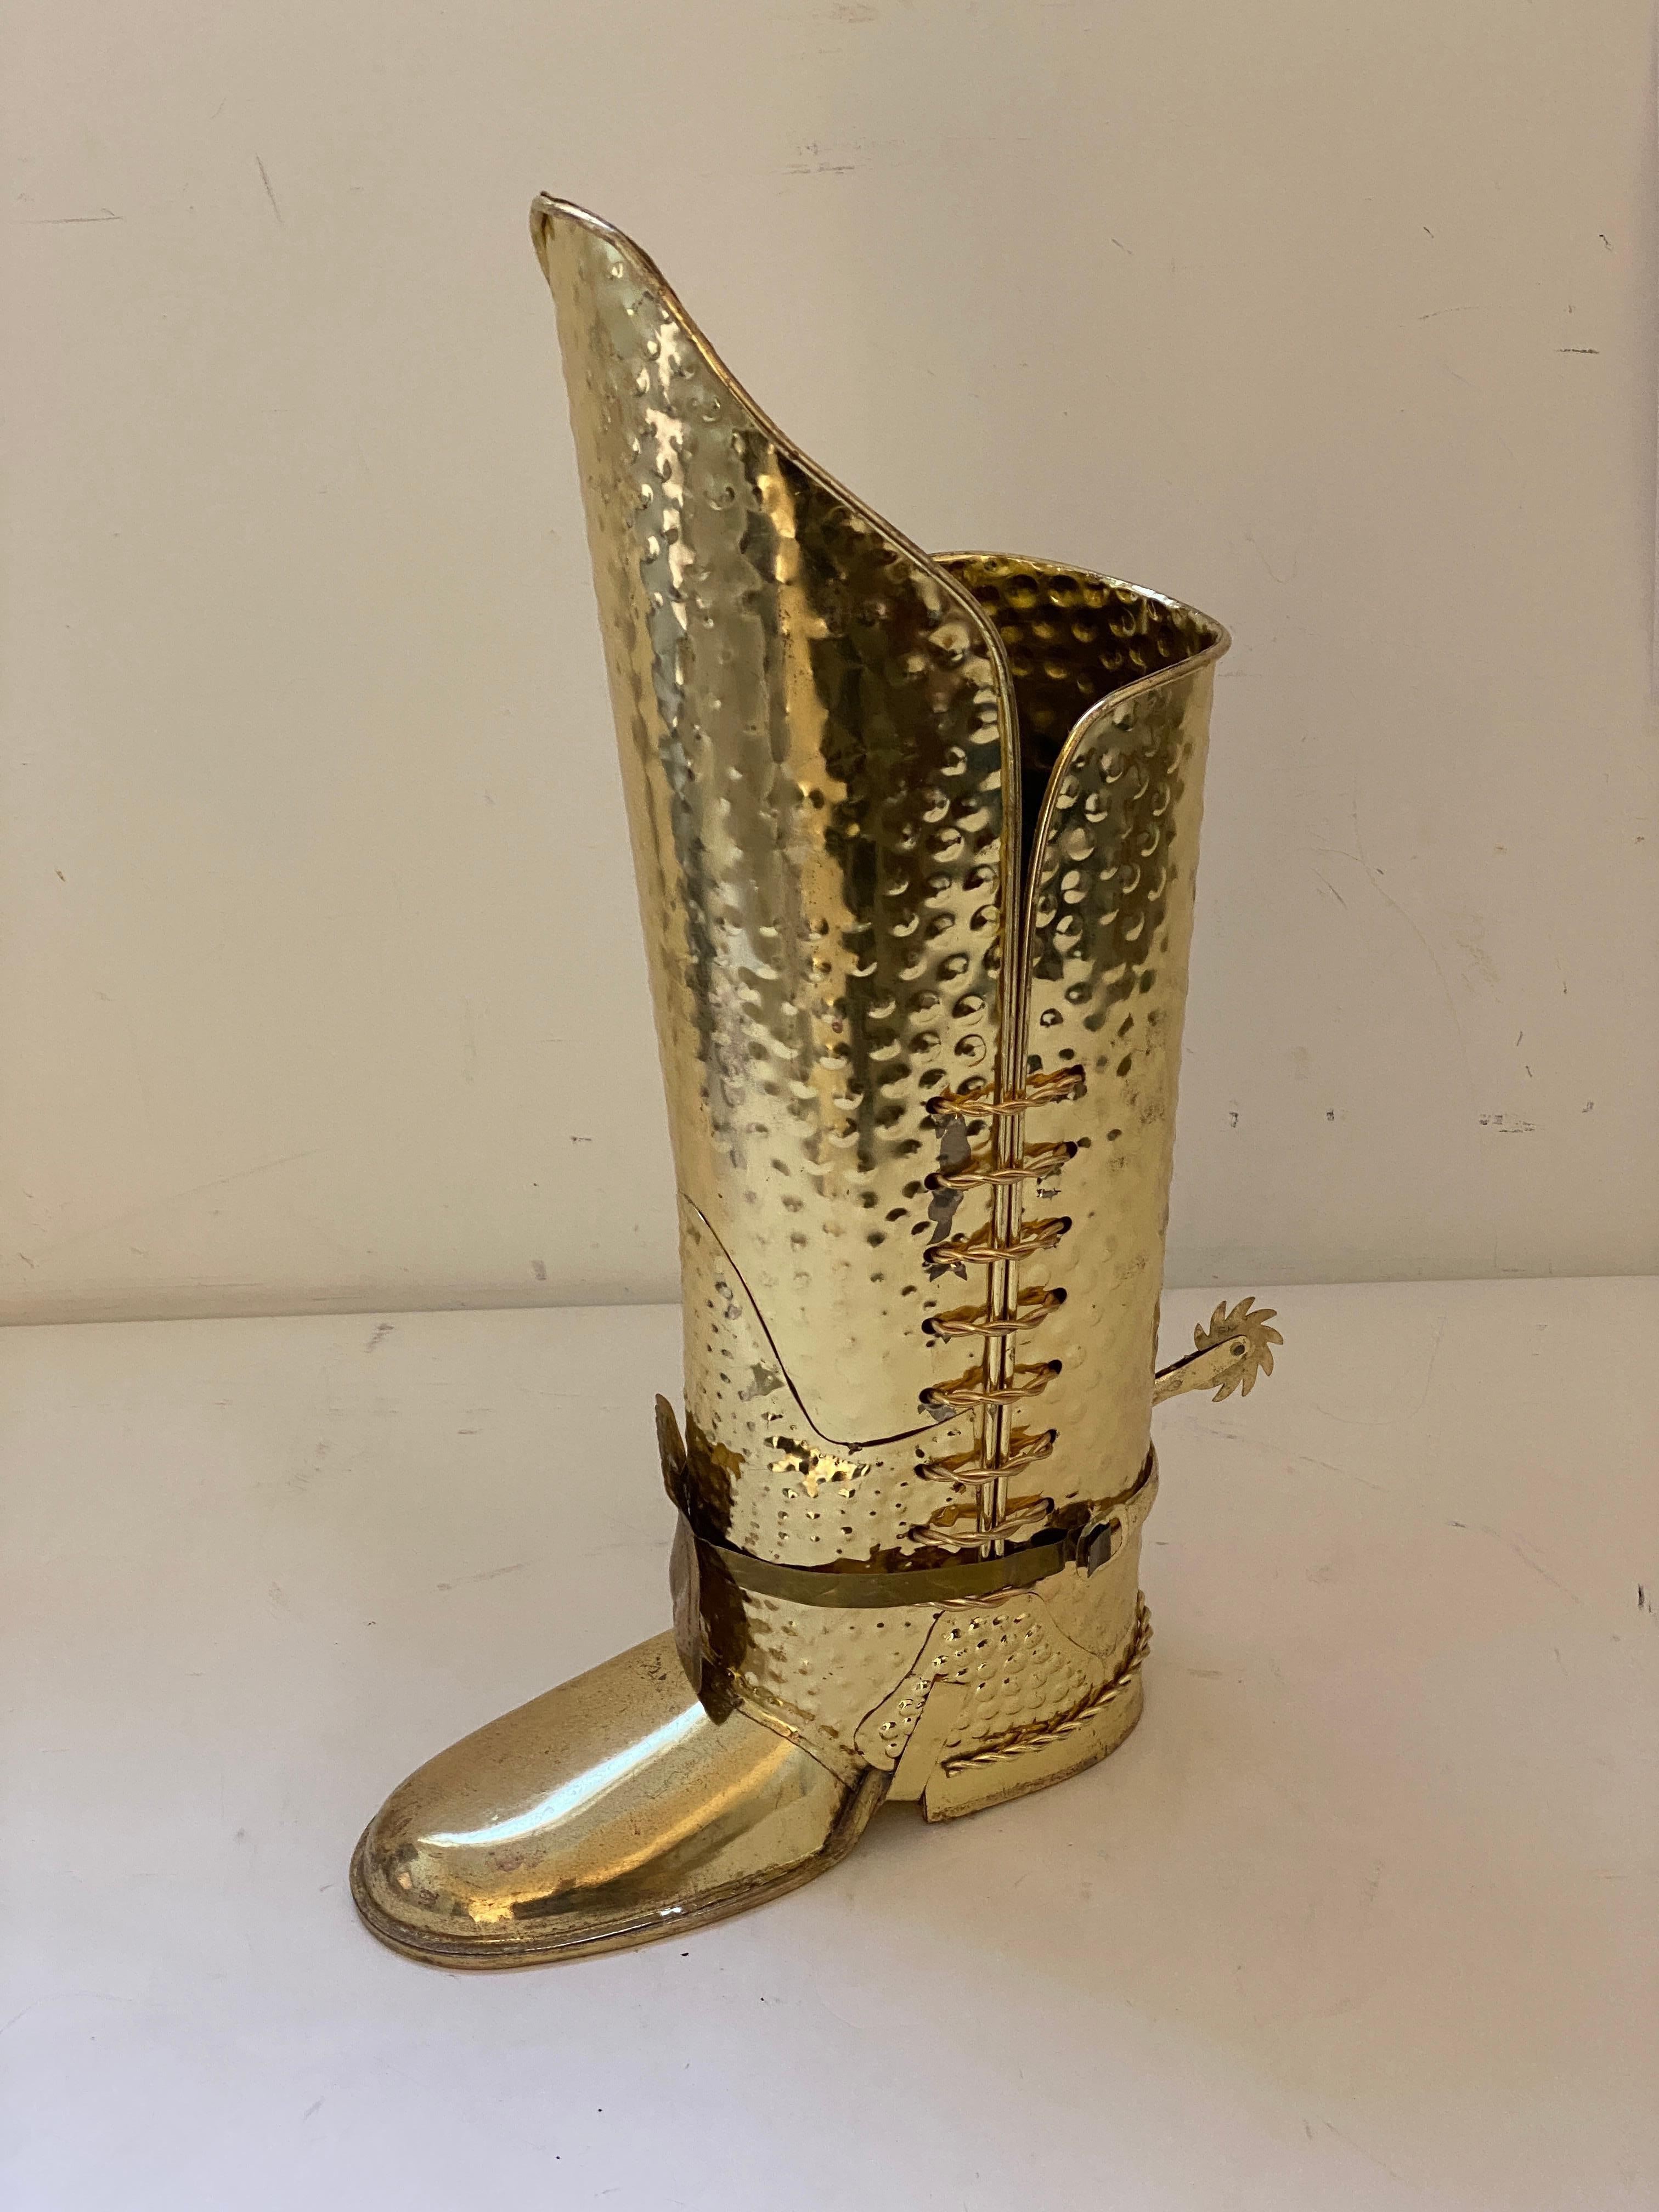 This stylish and chic boot-form umbrella holder dates to the 1970s and was created in England.

Note: The piece is fabricated in metal with a gold-tone finish.

Note: The red paper on the inside is to shield an umbrealla or cane catching on the